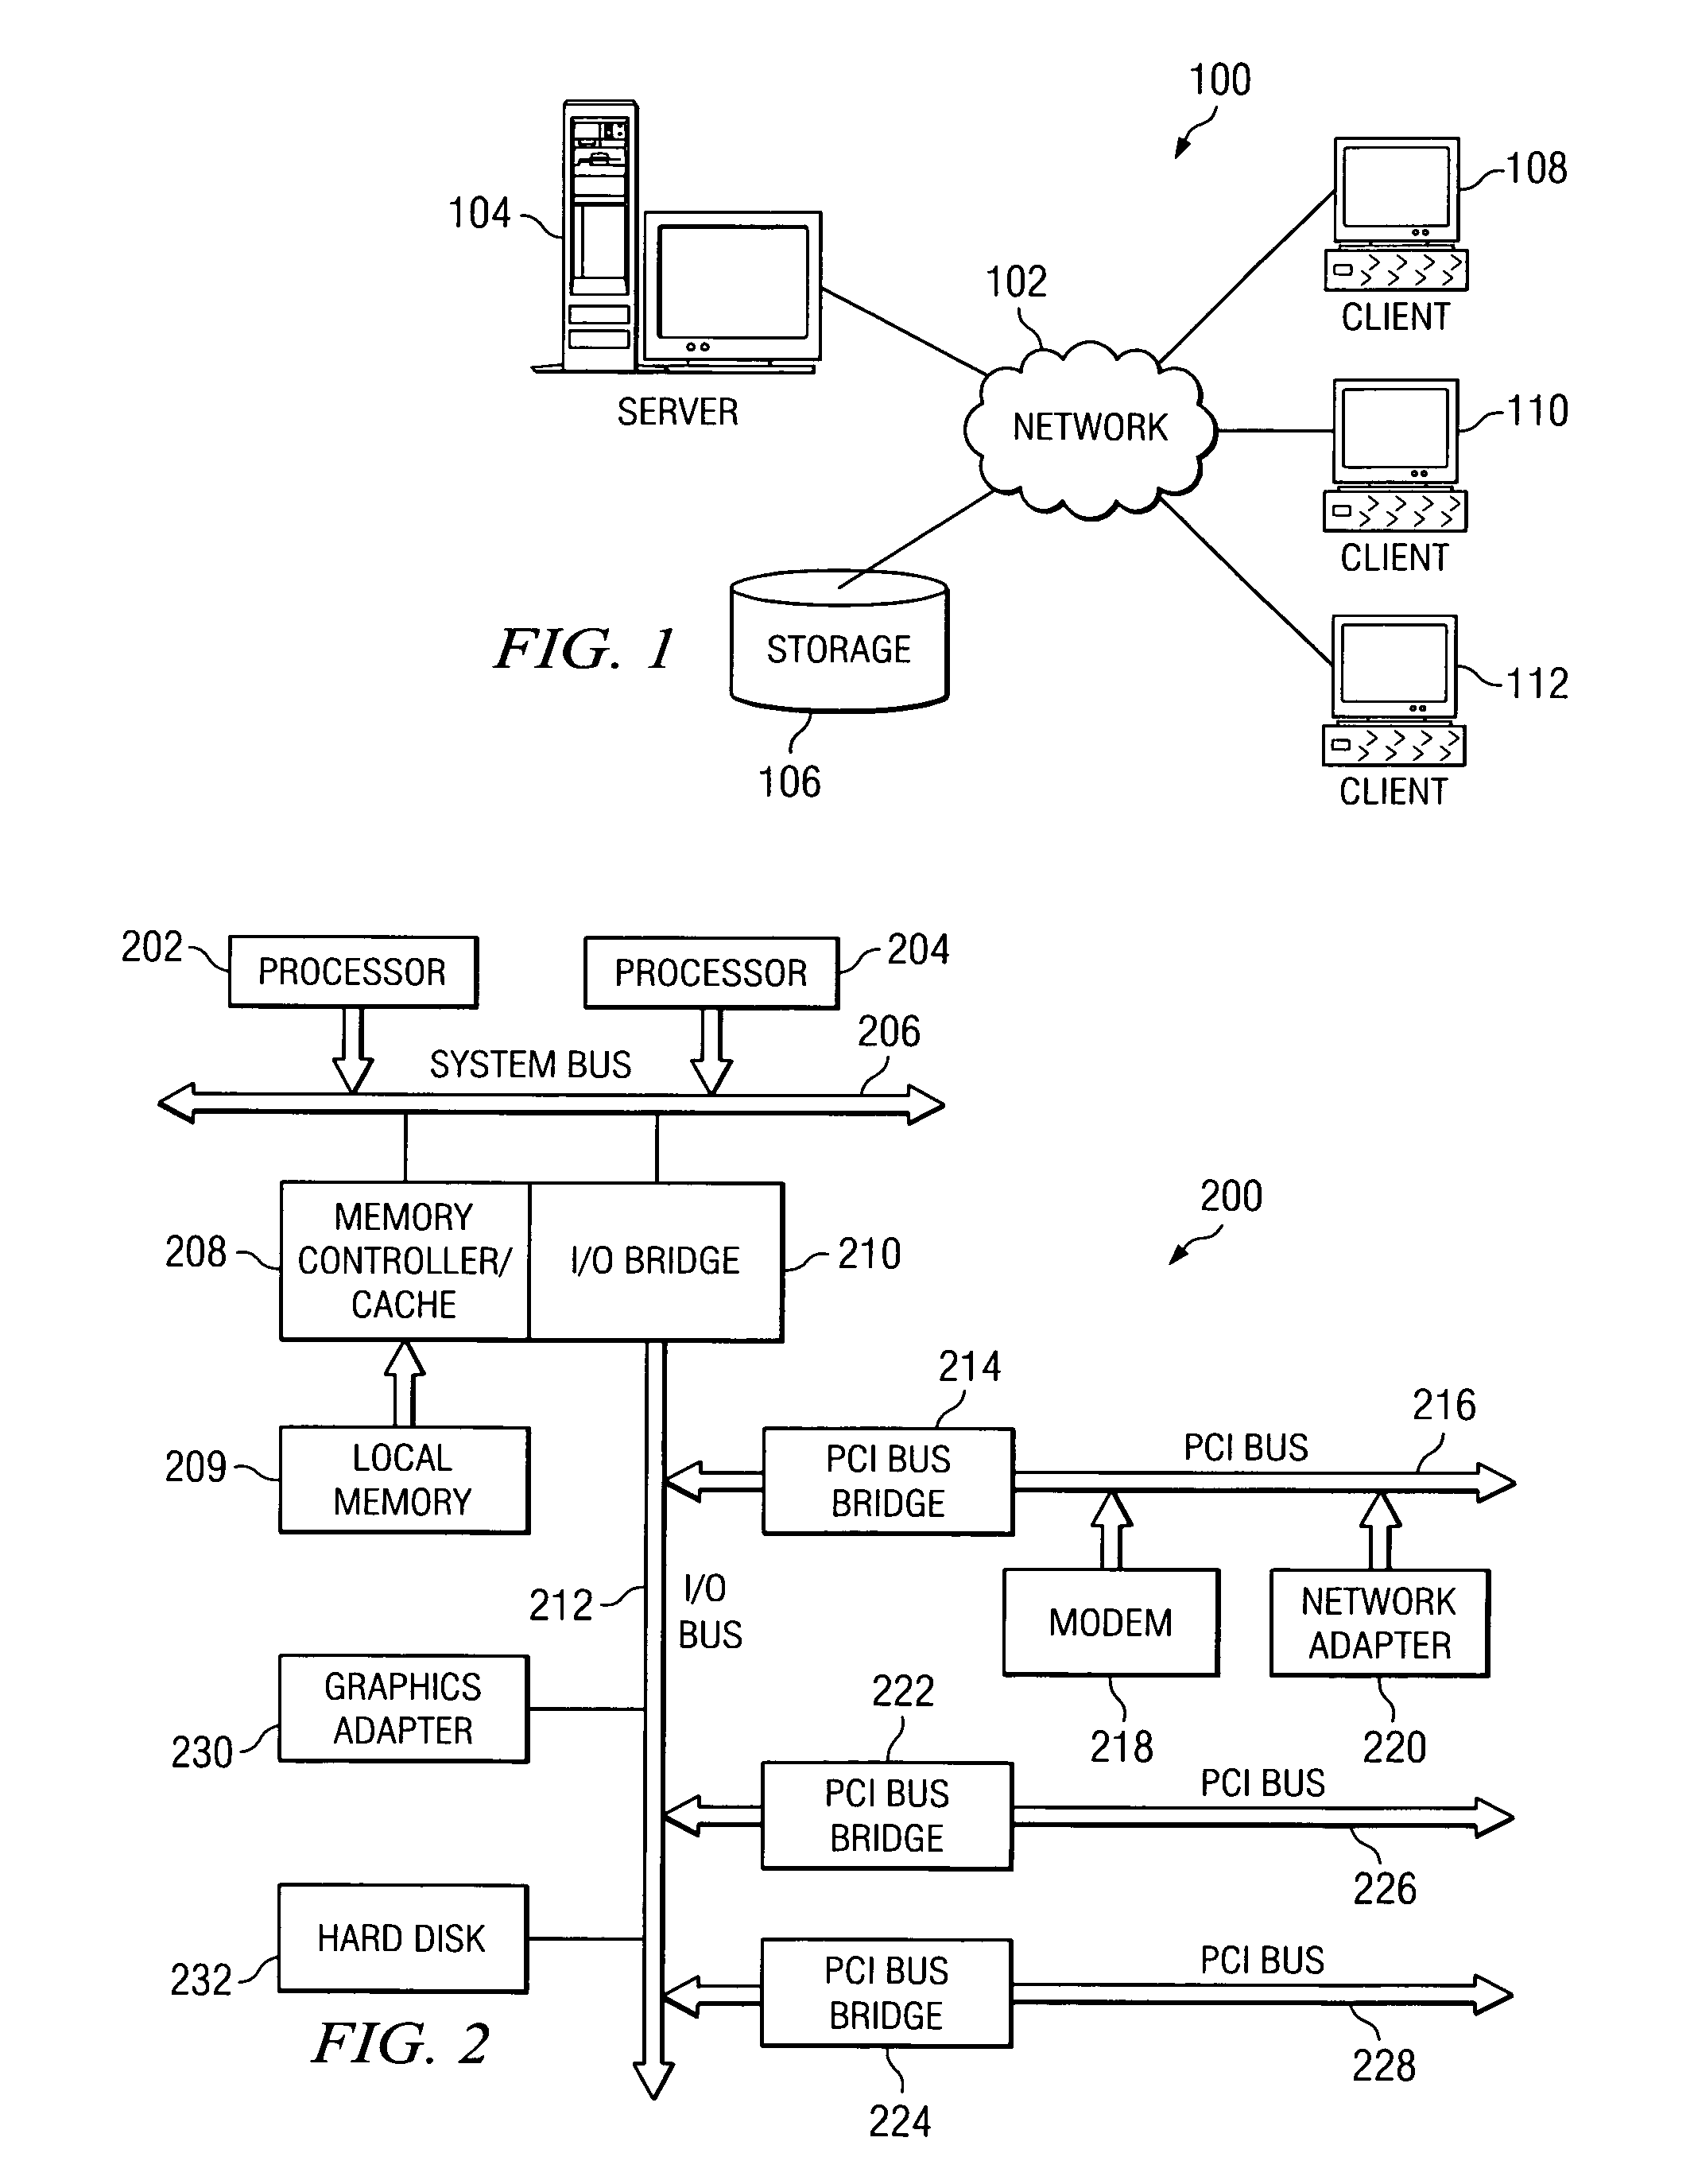 Reference monitor method for enforcing information flow policies